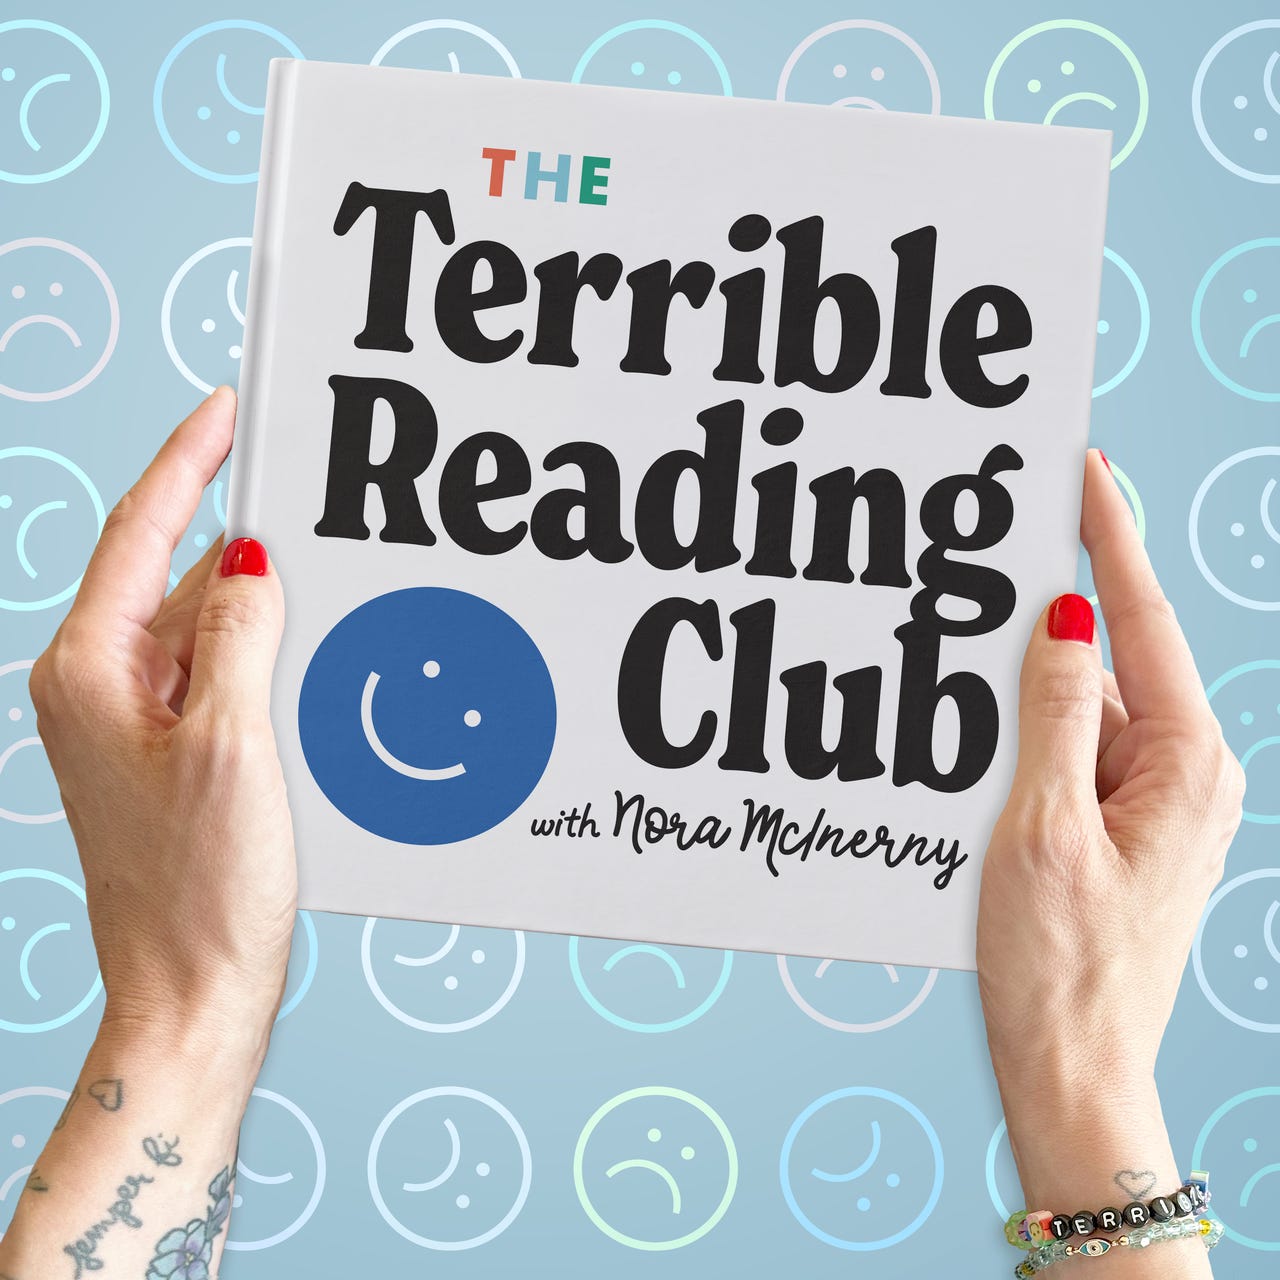 Artwork for The Terrible Reading Club